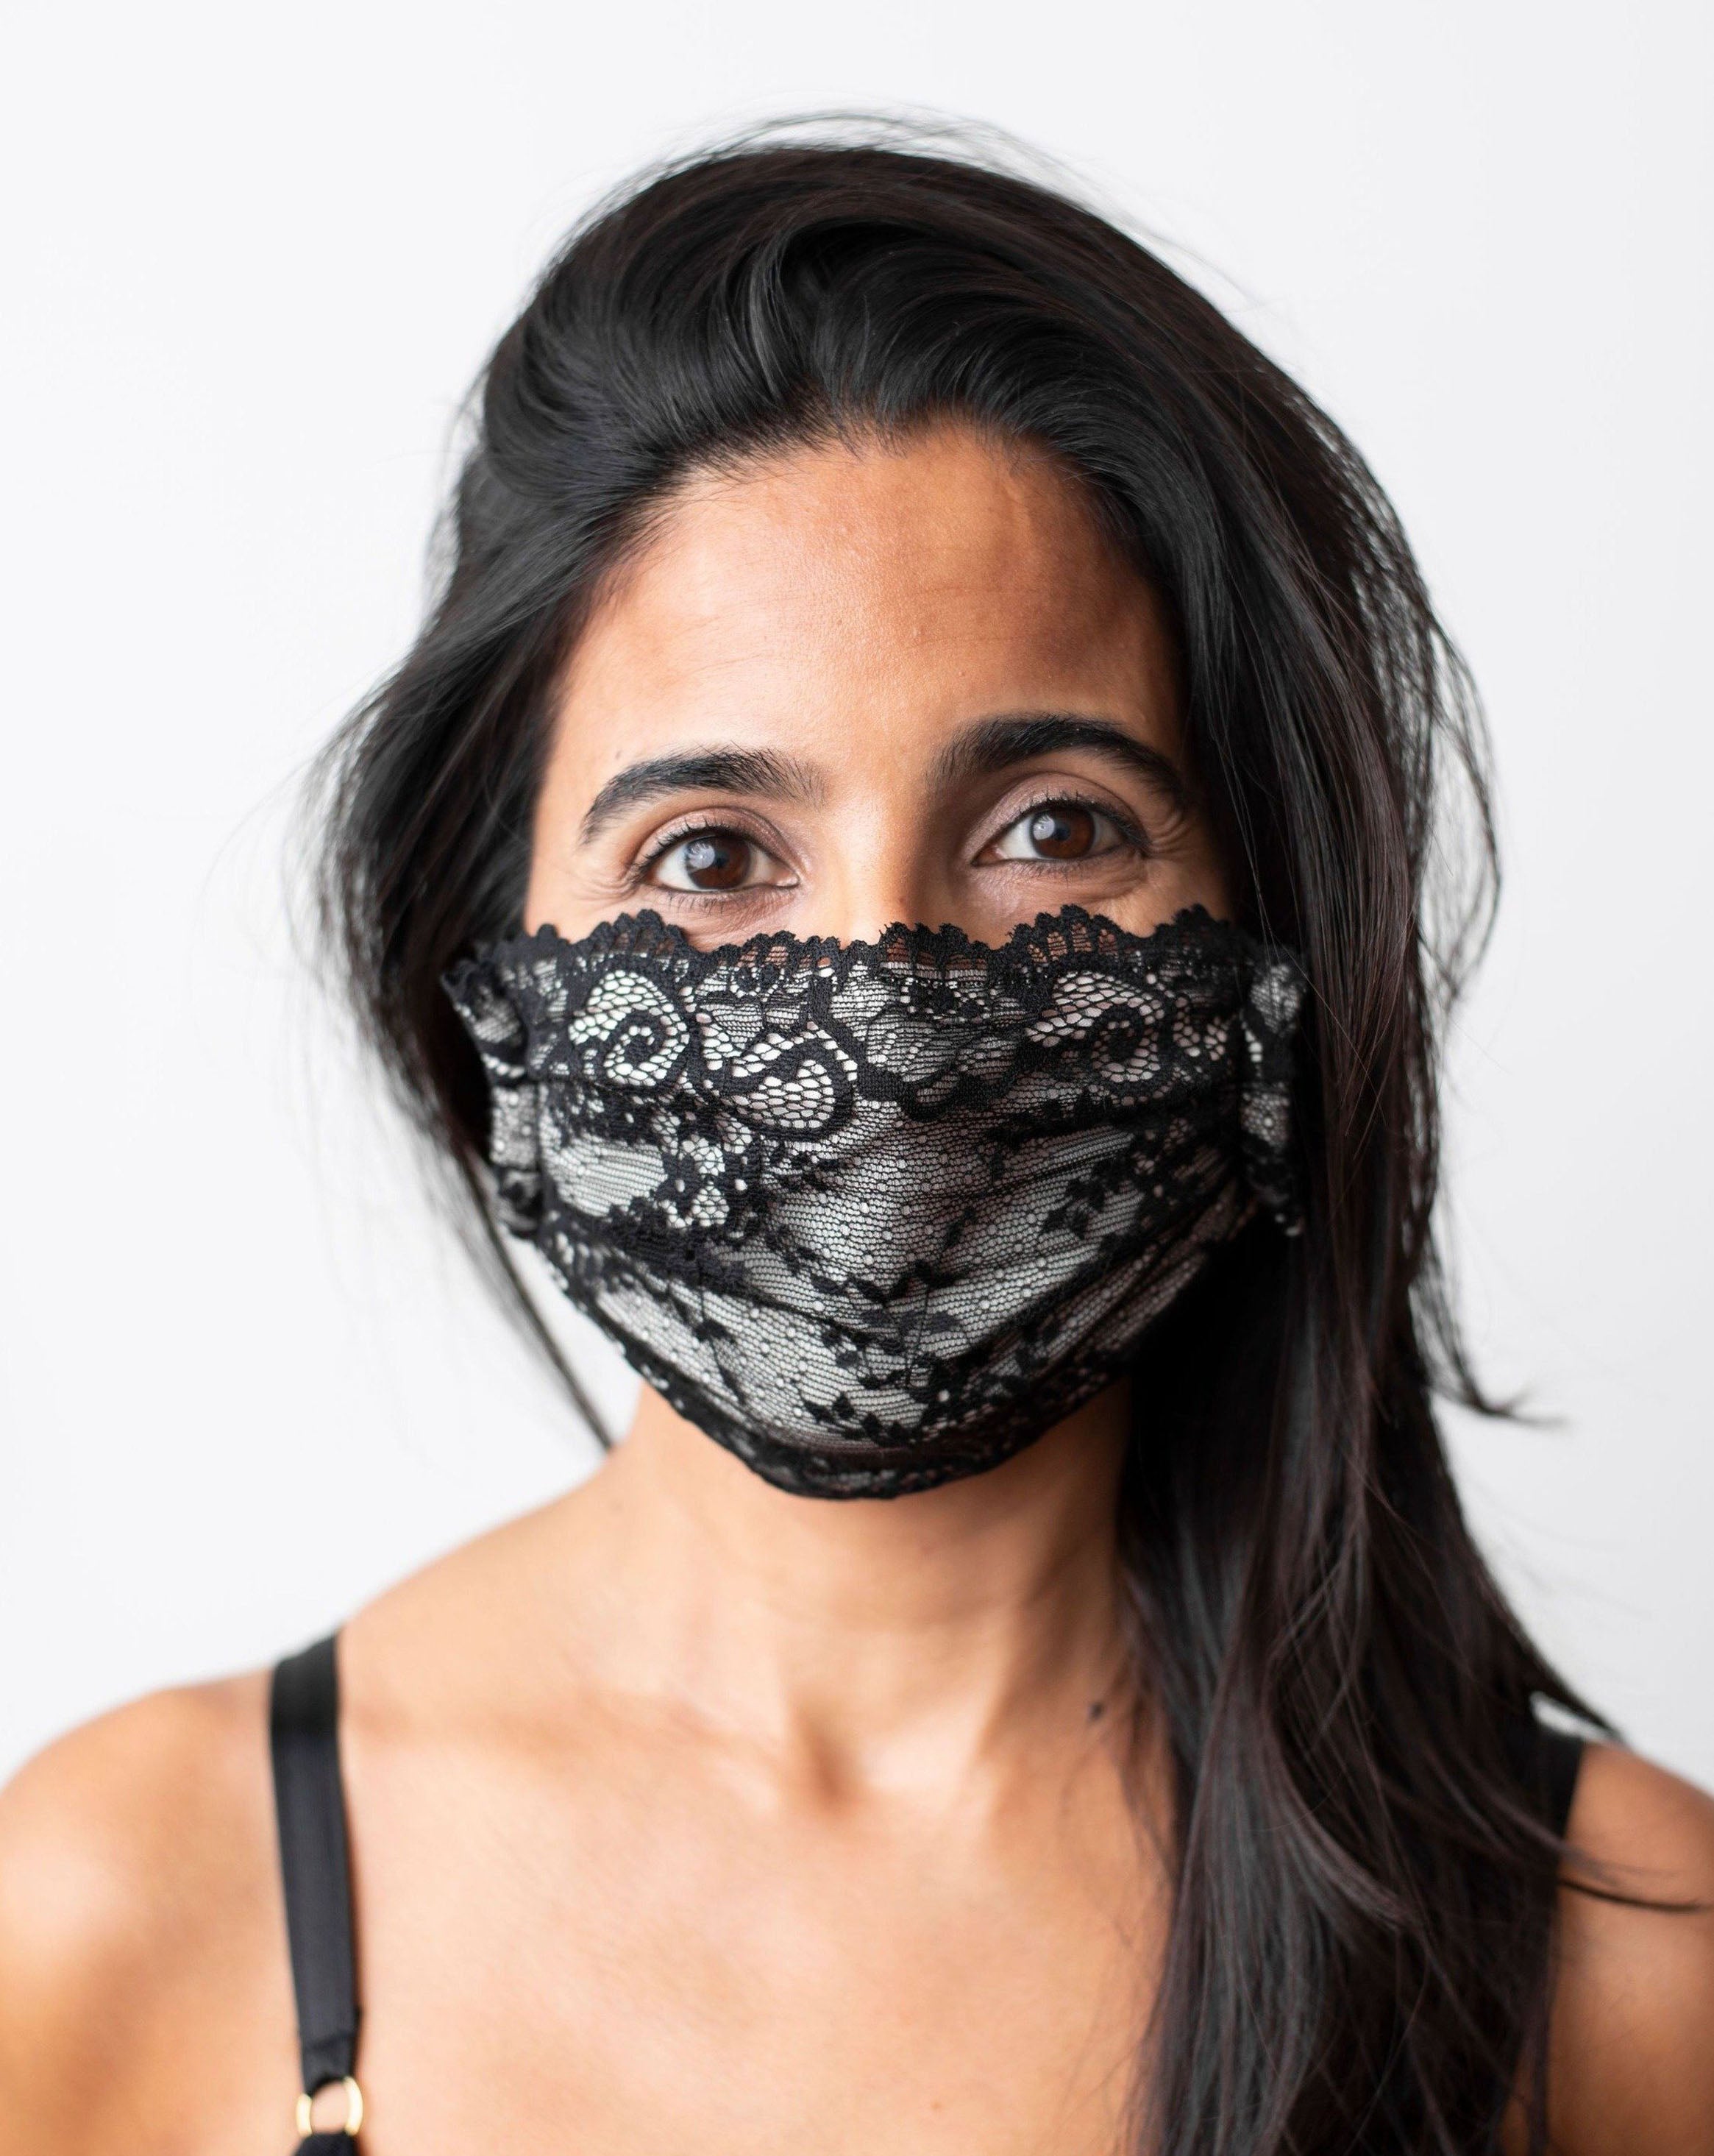 Ruhee, female with long black hair, wearing a black lace, organic cotton mask. Front shot against a plain white background.